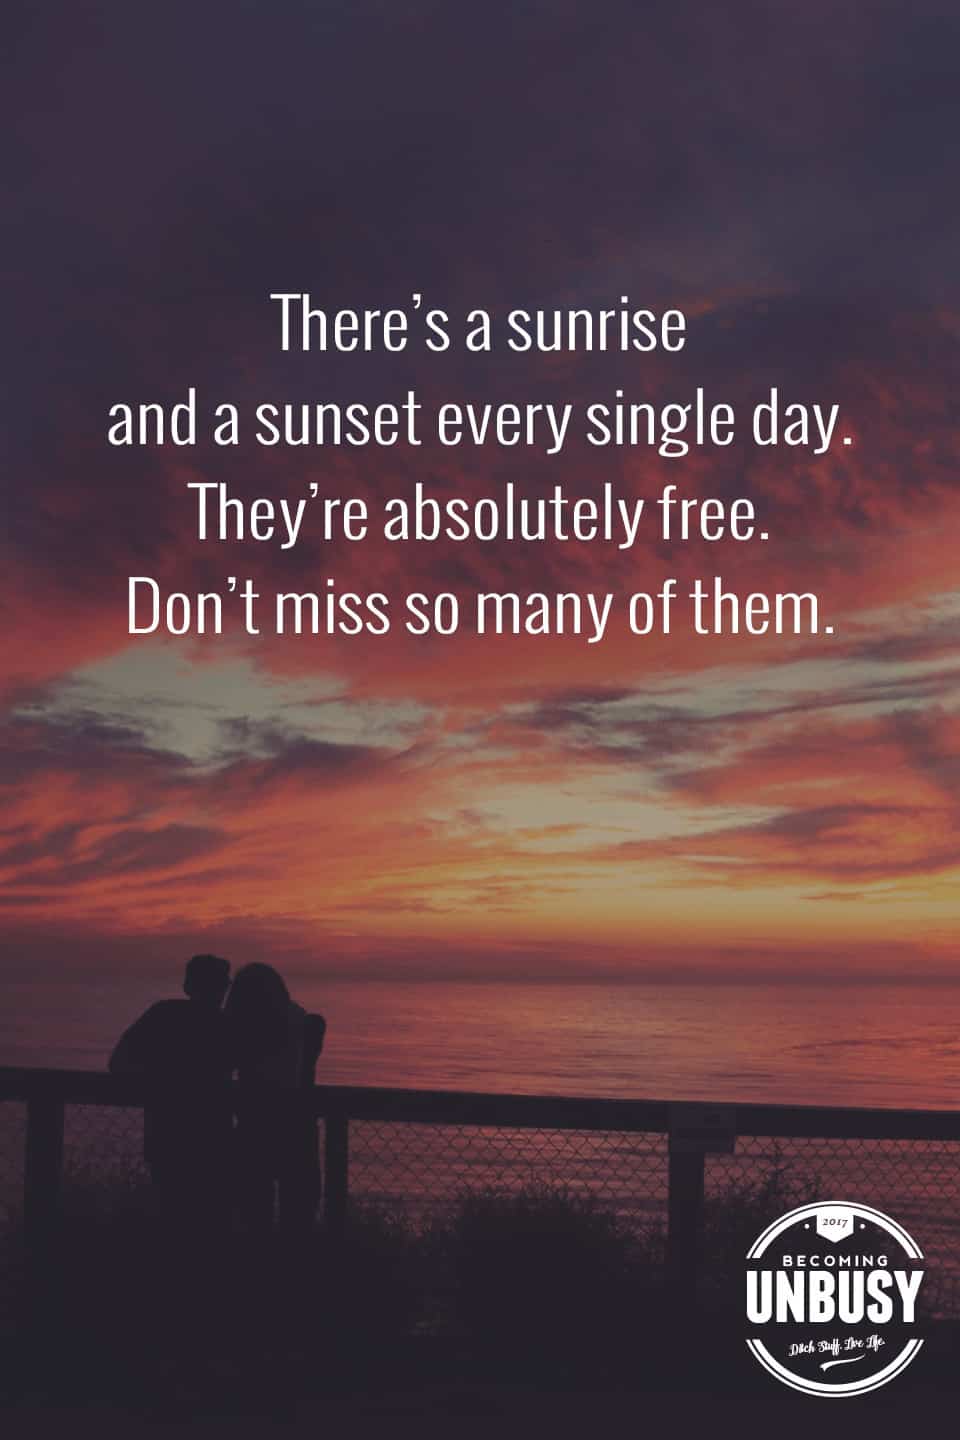 There’s a sunrise and a sunset every single day. They're absolutely free. Don't miss so many of them. *Love this quote, these life list ideas and this Becoming UnBusy site. Great suggestions!